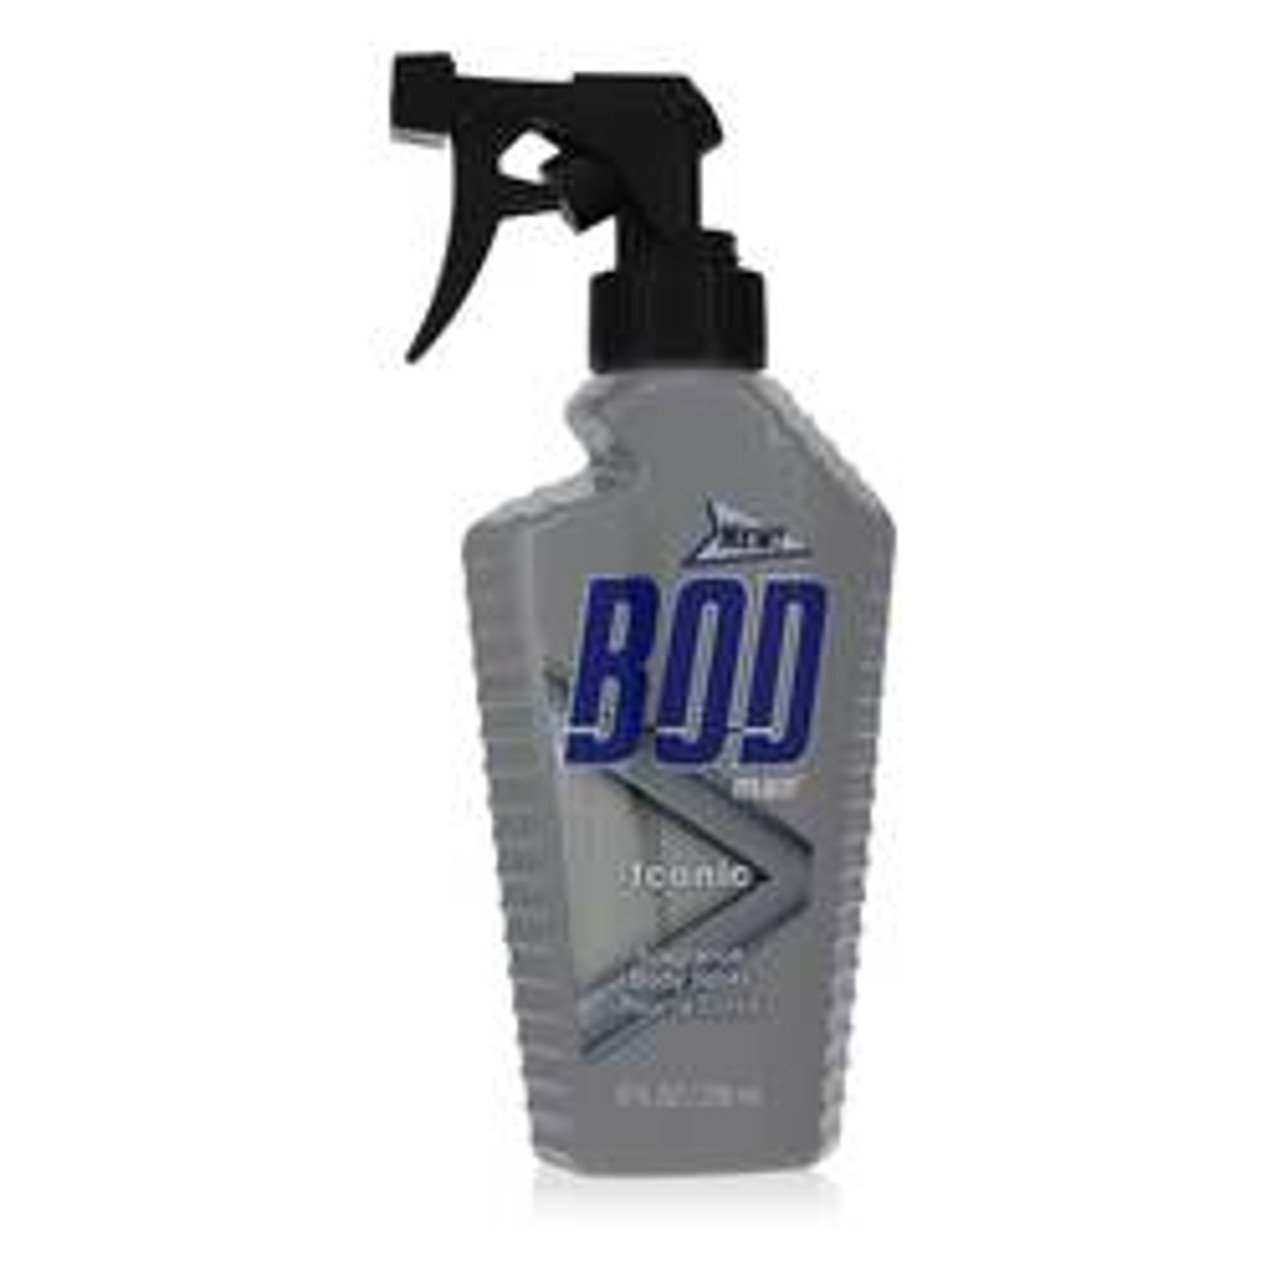 Bod Man Iconic Cologne By Parfums De Coeur Body Spray 8 oz for Men - [From 27.00 - Choose pk Qty ] - *Ships from Miami